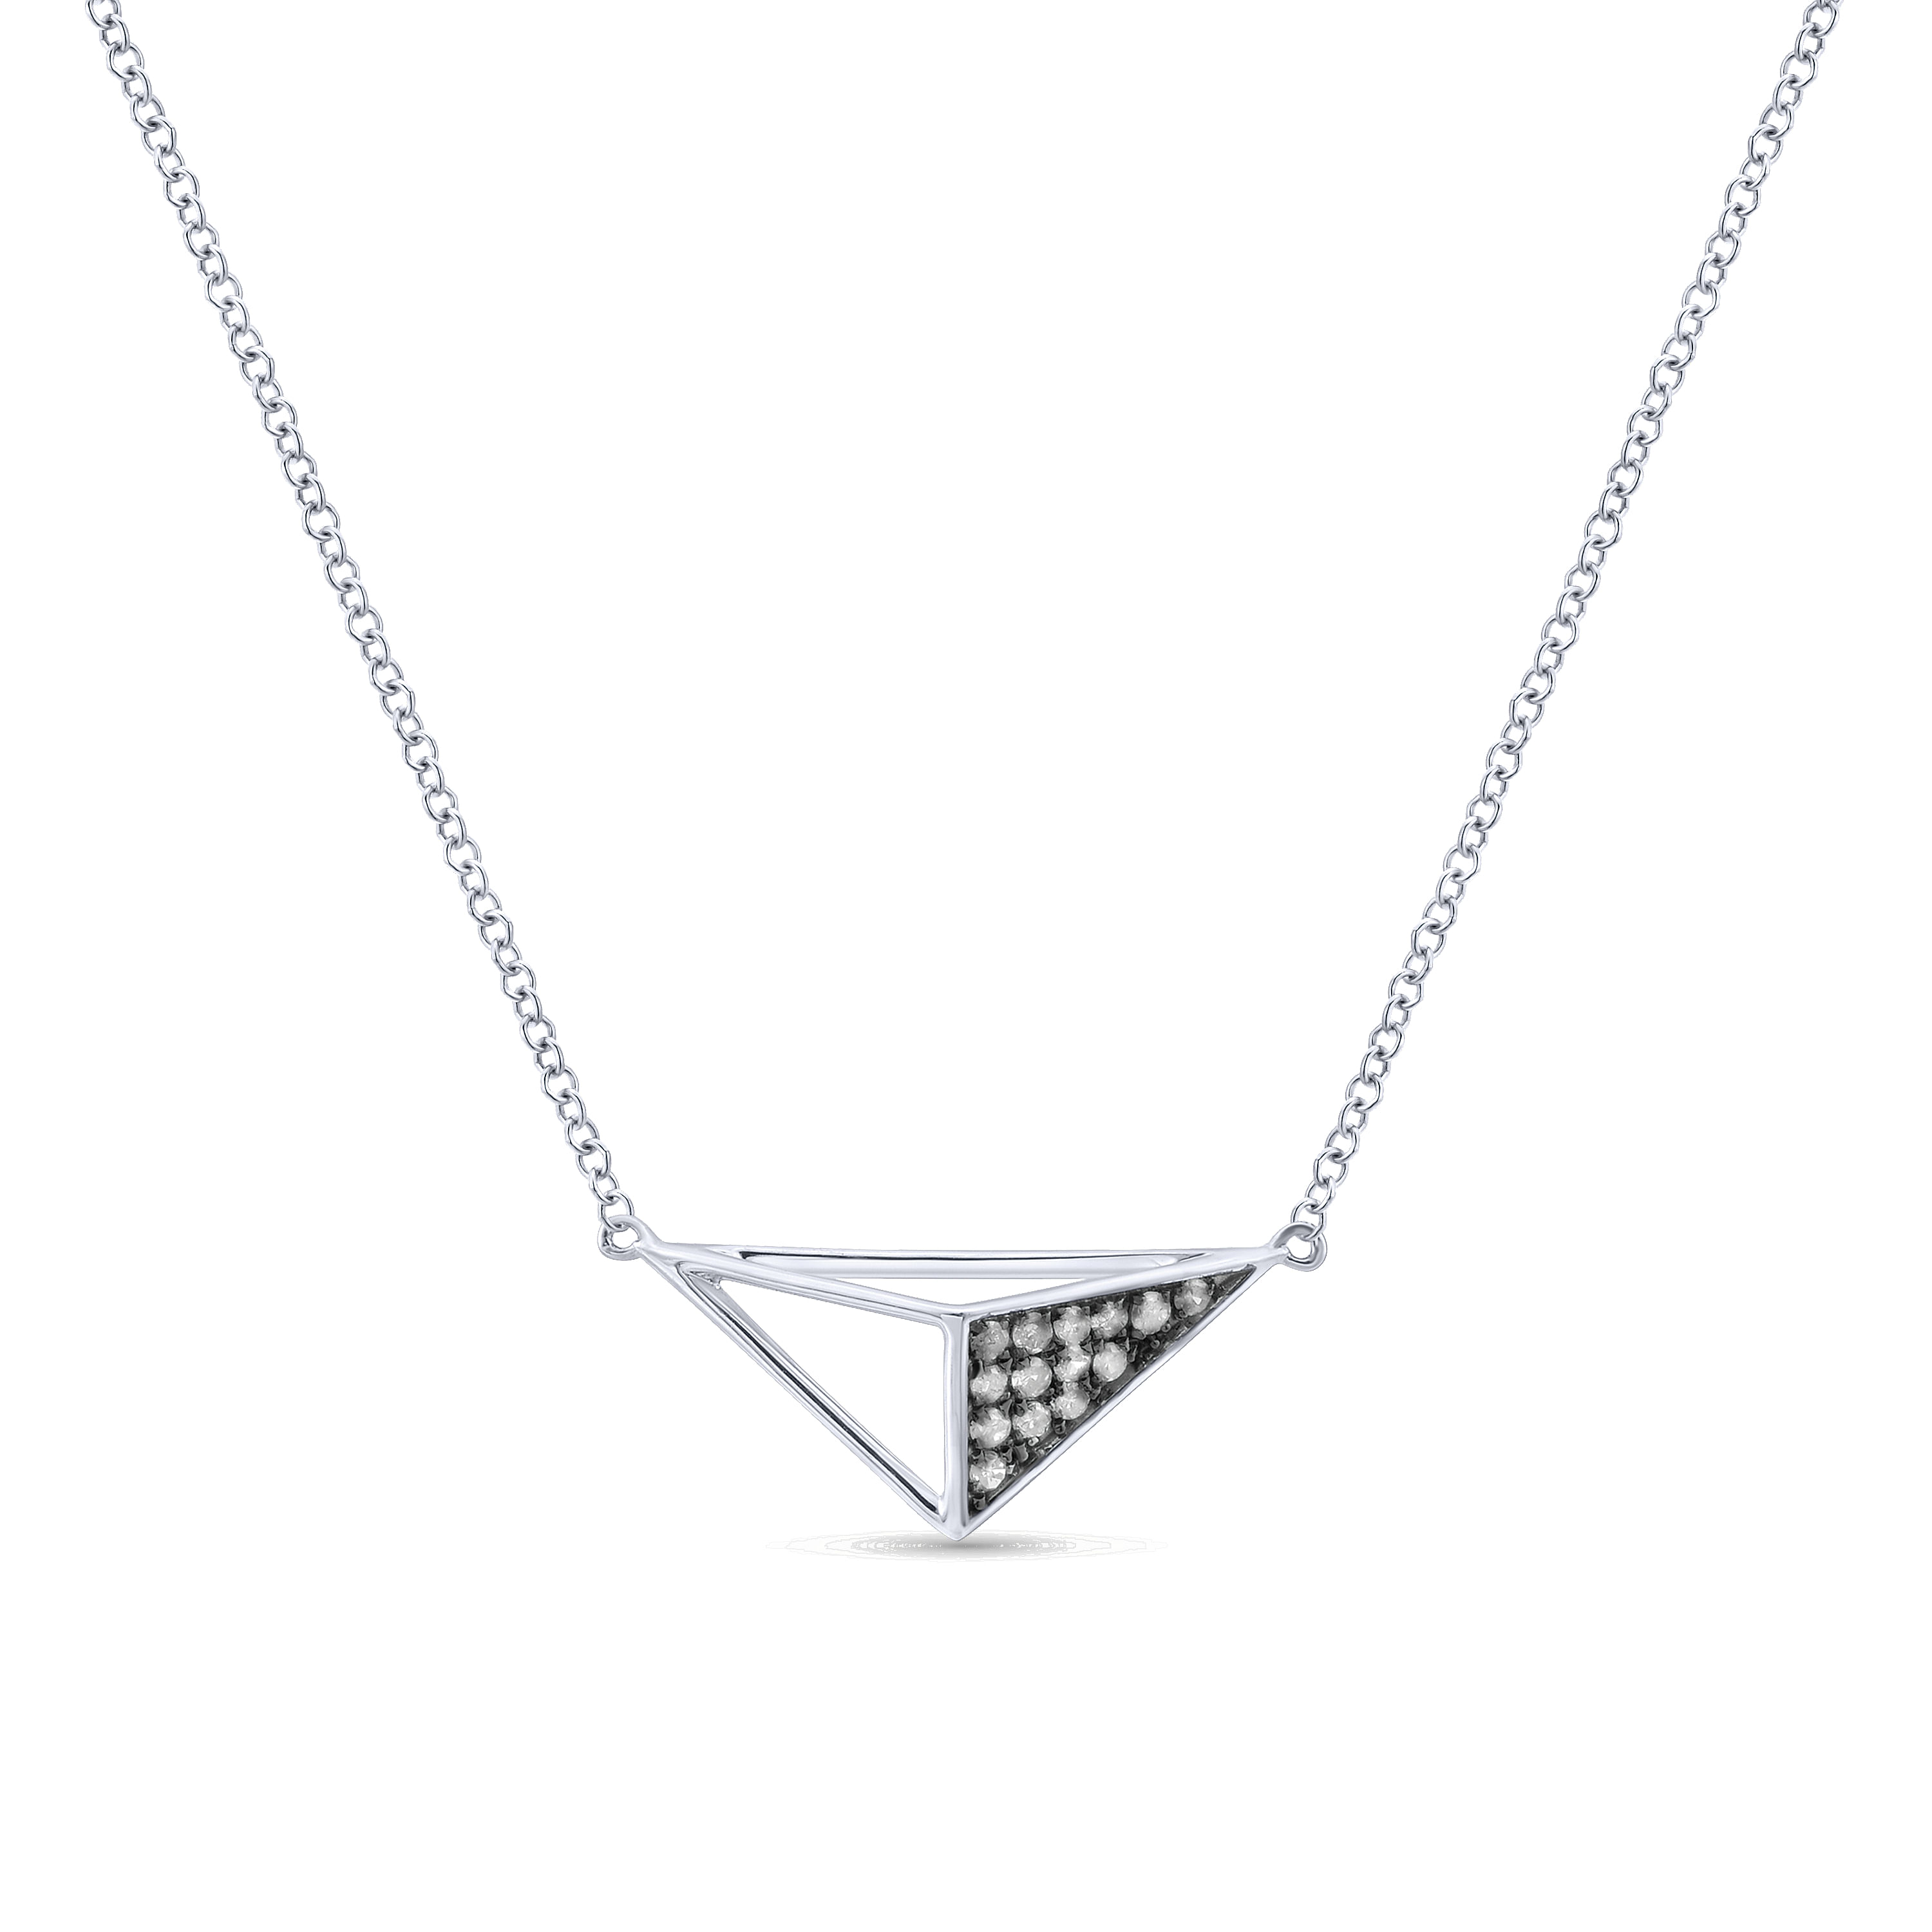 Gabriel - 925 Sterling Silver Geometric Pendant Necklace with Diamonds